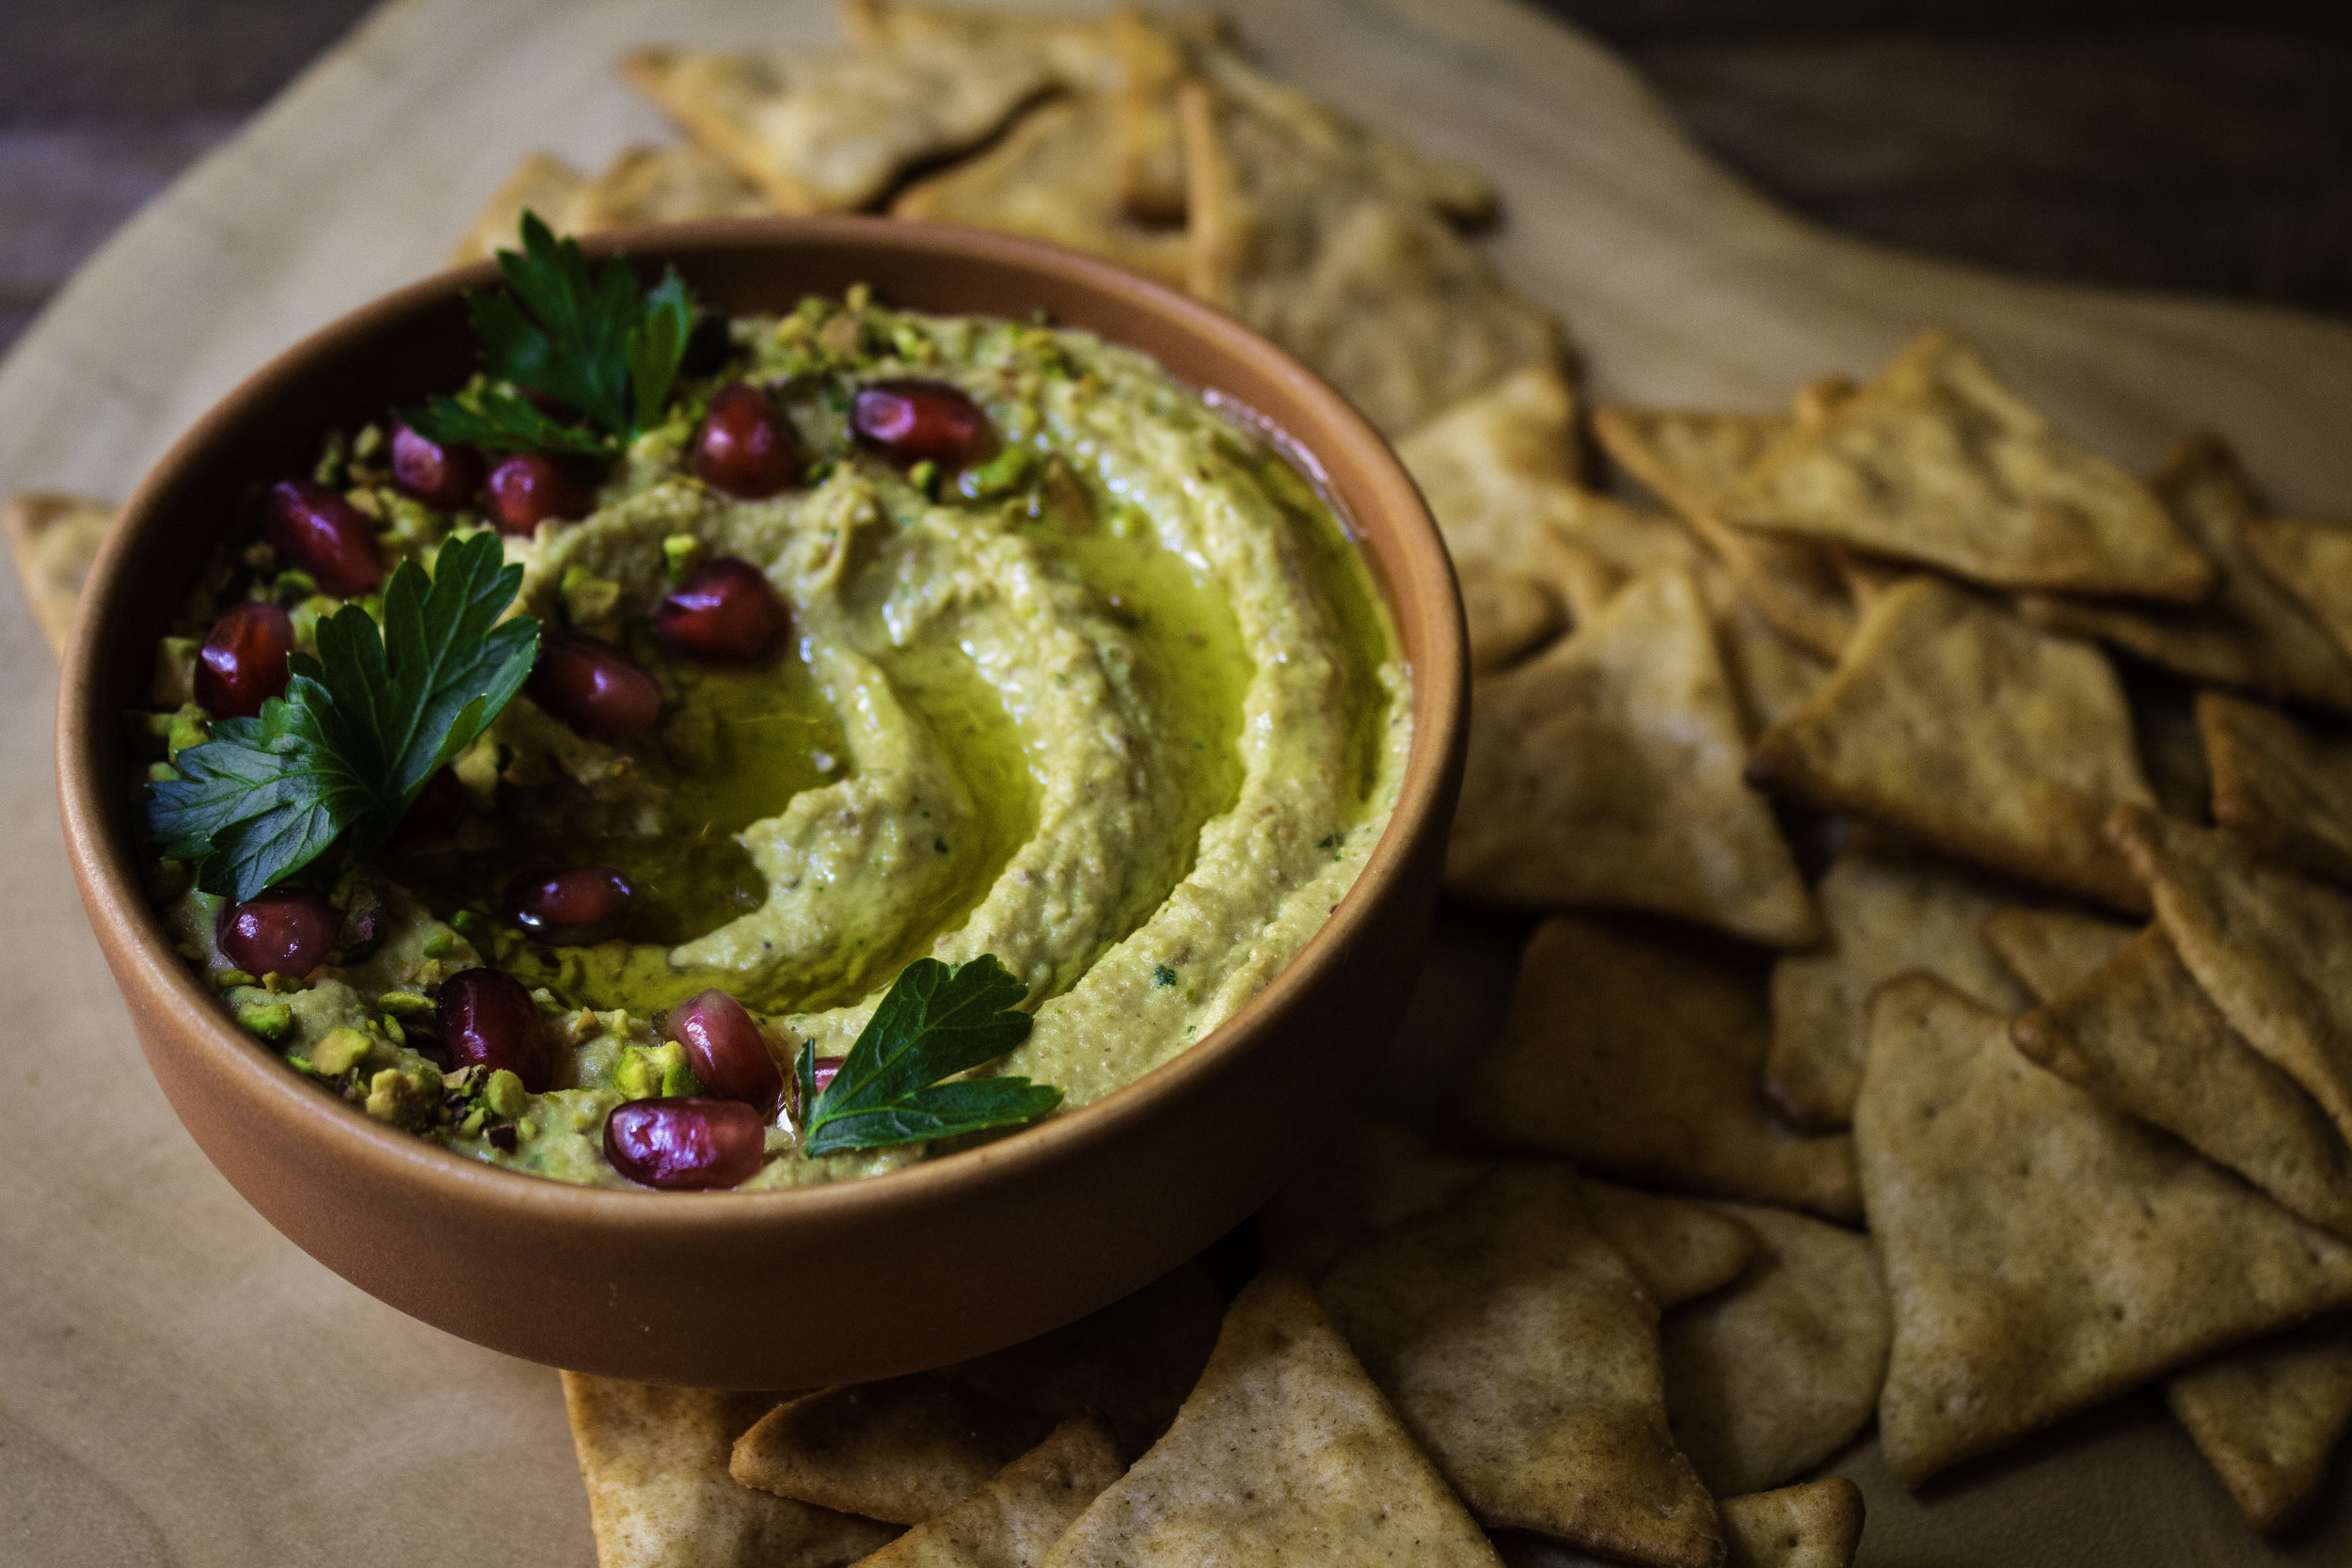 Terra cotta-colored bowl with swirls of hummus with parsley, pistachio and pomegranate seed garnish with chips on the side.